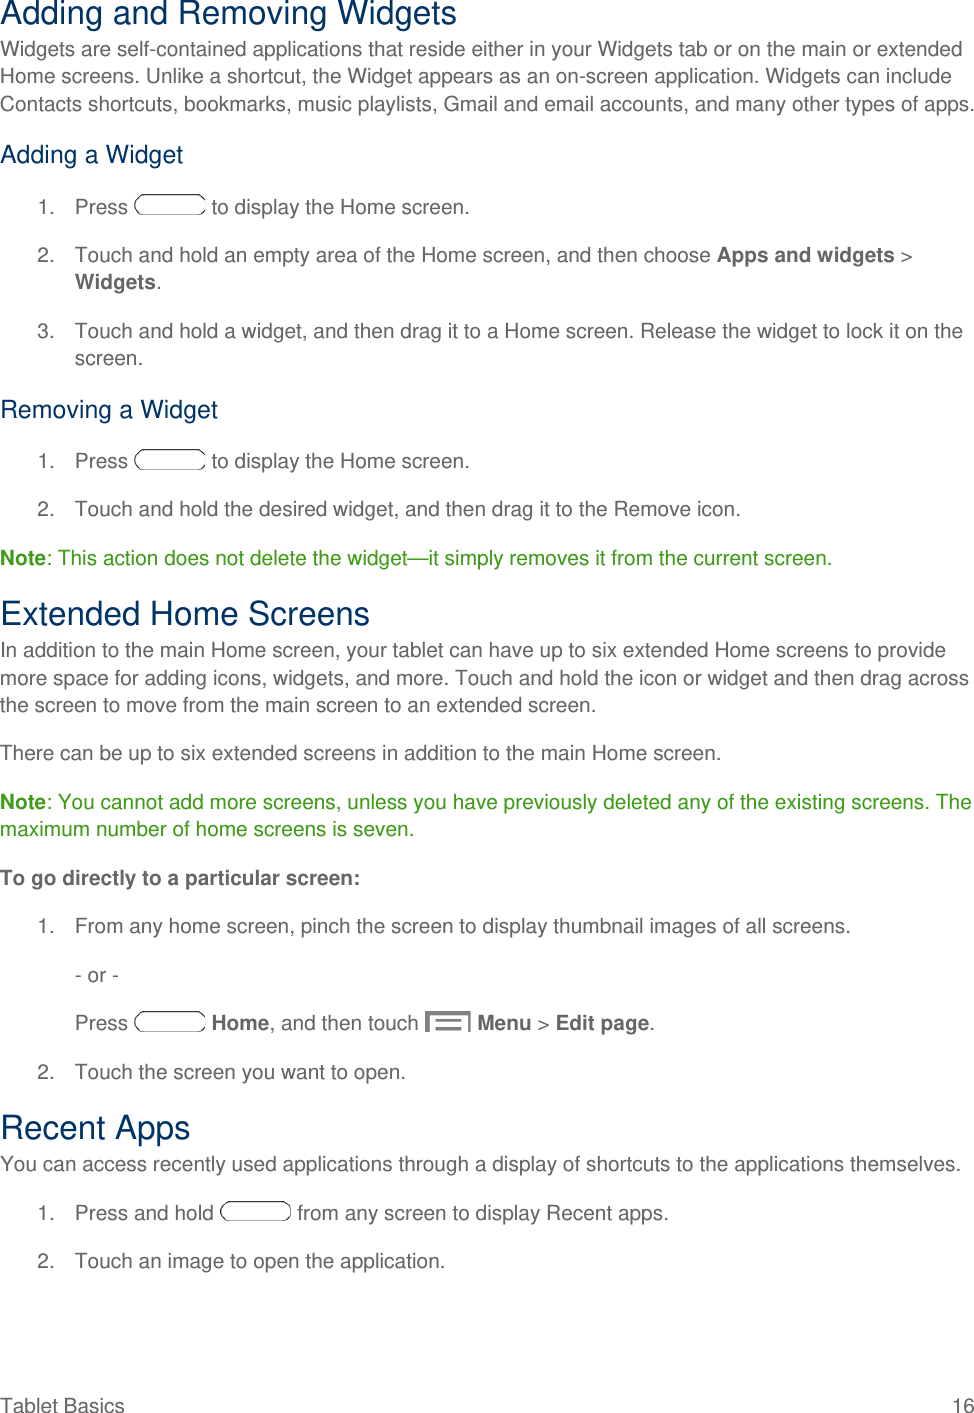 Adding and Removing Widgets Widgets are self-contained applications that reside either in your Widgets tab or on the main or extended Home screens. Unlike a shortcut, the Widget appears as an on-screen application. Widgets can include Contacts shortcuts, bookmarks, music playlists, Gmail and email accounts, and many other types of apps. Adding a Widget 1. Press   to display the Home screen. 2. Touch and hold an empty area of the Home screen, and then choose Apps and widgets &gt; Widgets. 3. Touch and hold a widget, and then drag it to a Home screen. Release the widget to lock it on the screen. Removing a Widget 1. Press   to display the Home screen. 2. Touch and hold the desired widget, and then drag it to the Remove icon. Note: This action does not delete the widget—it simply removes it from the current screen. Extended Home Screens In addition to the main Home screen, your tablet can have up to six extended Home screens to provide more space for adding icons, widgets, and more. Touch and hold the icon or widget and then drag across the screen to move from the main screen to an extended screen. There can be up to six extended screens in addition to the main Home screen. Note: You cannot add more screens, unless you have previously deleted any of the existing screens. The maximum number of home screens is seven. To go directly to a particular screen: 1. From any home screen, pinch the screen to display thumbnail images of all screens. - or - Press   Home, and then touch   Menu &gt; Edit page. 2. Touch the screen you want to open. Recent Apps You can access recently used applications through a display of shortcuts to the applications themselves.  1. Press and hold   from any screen to display Recent apps. 2. Touch an image to open the application. Tablet Basics 16   